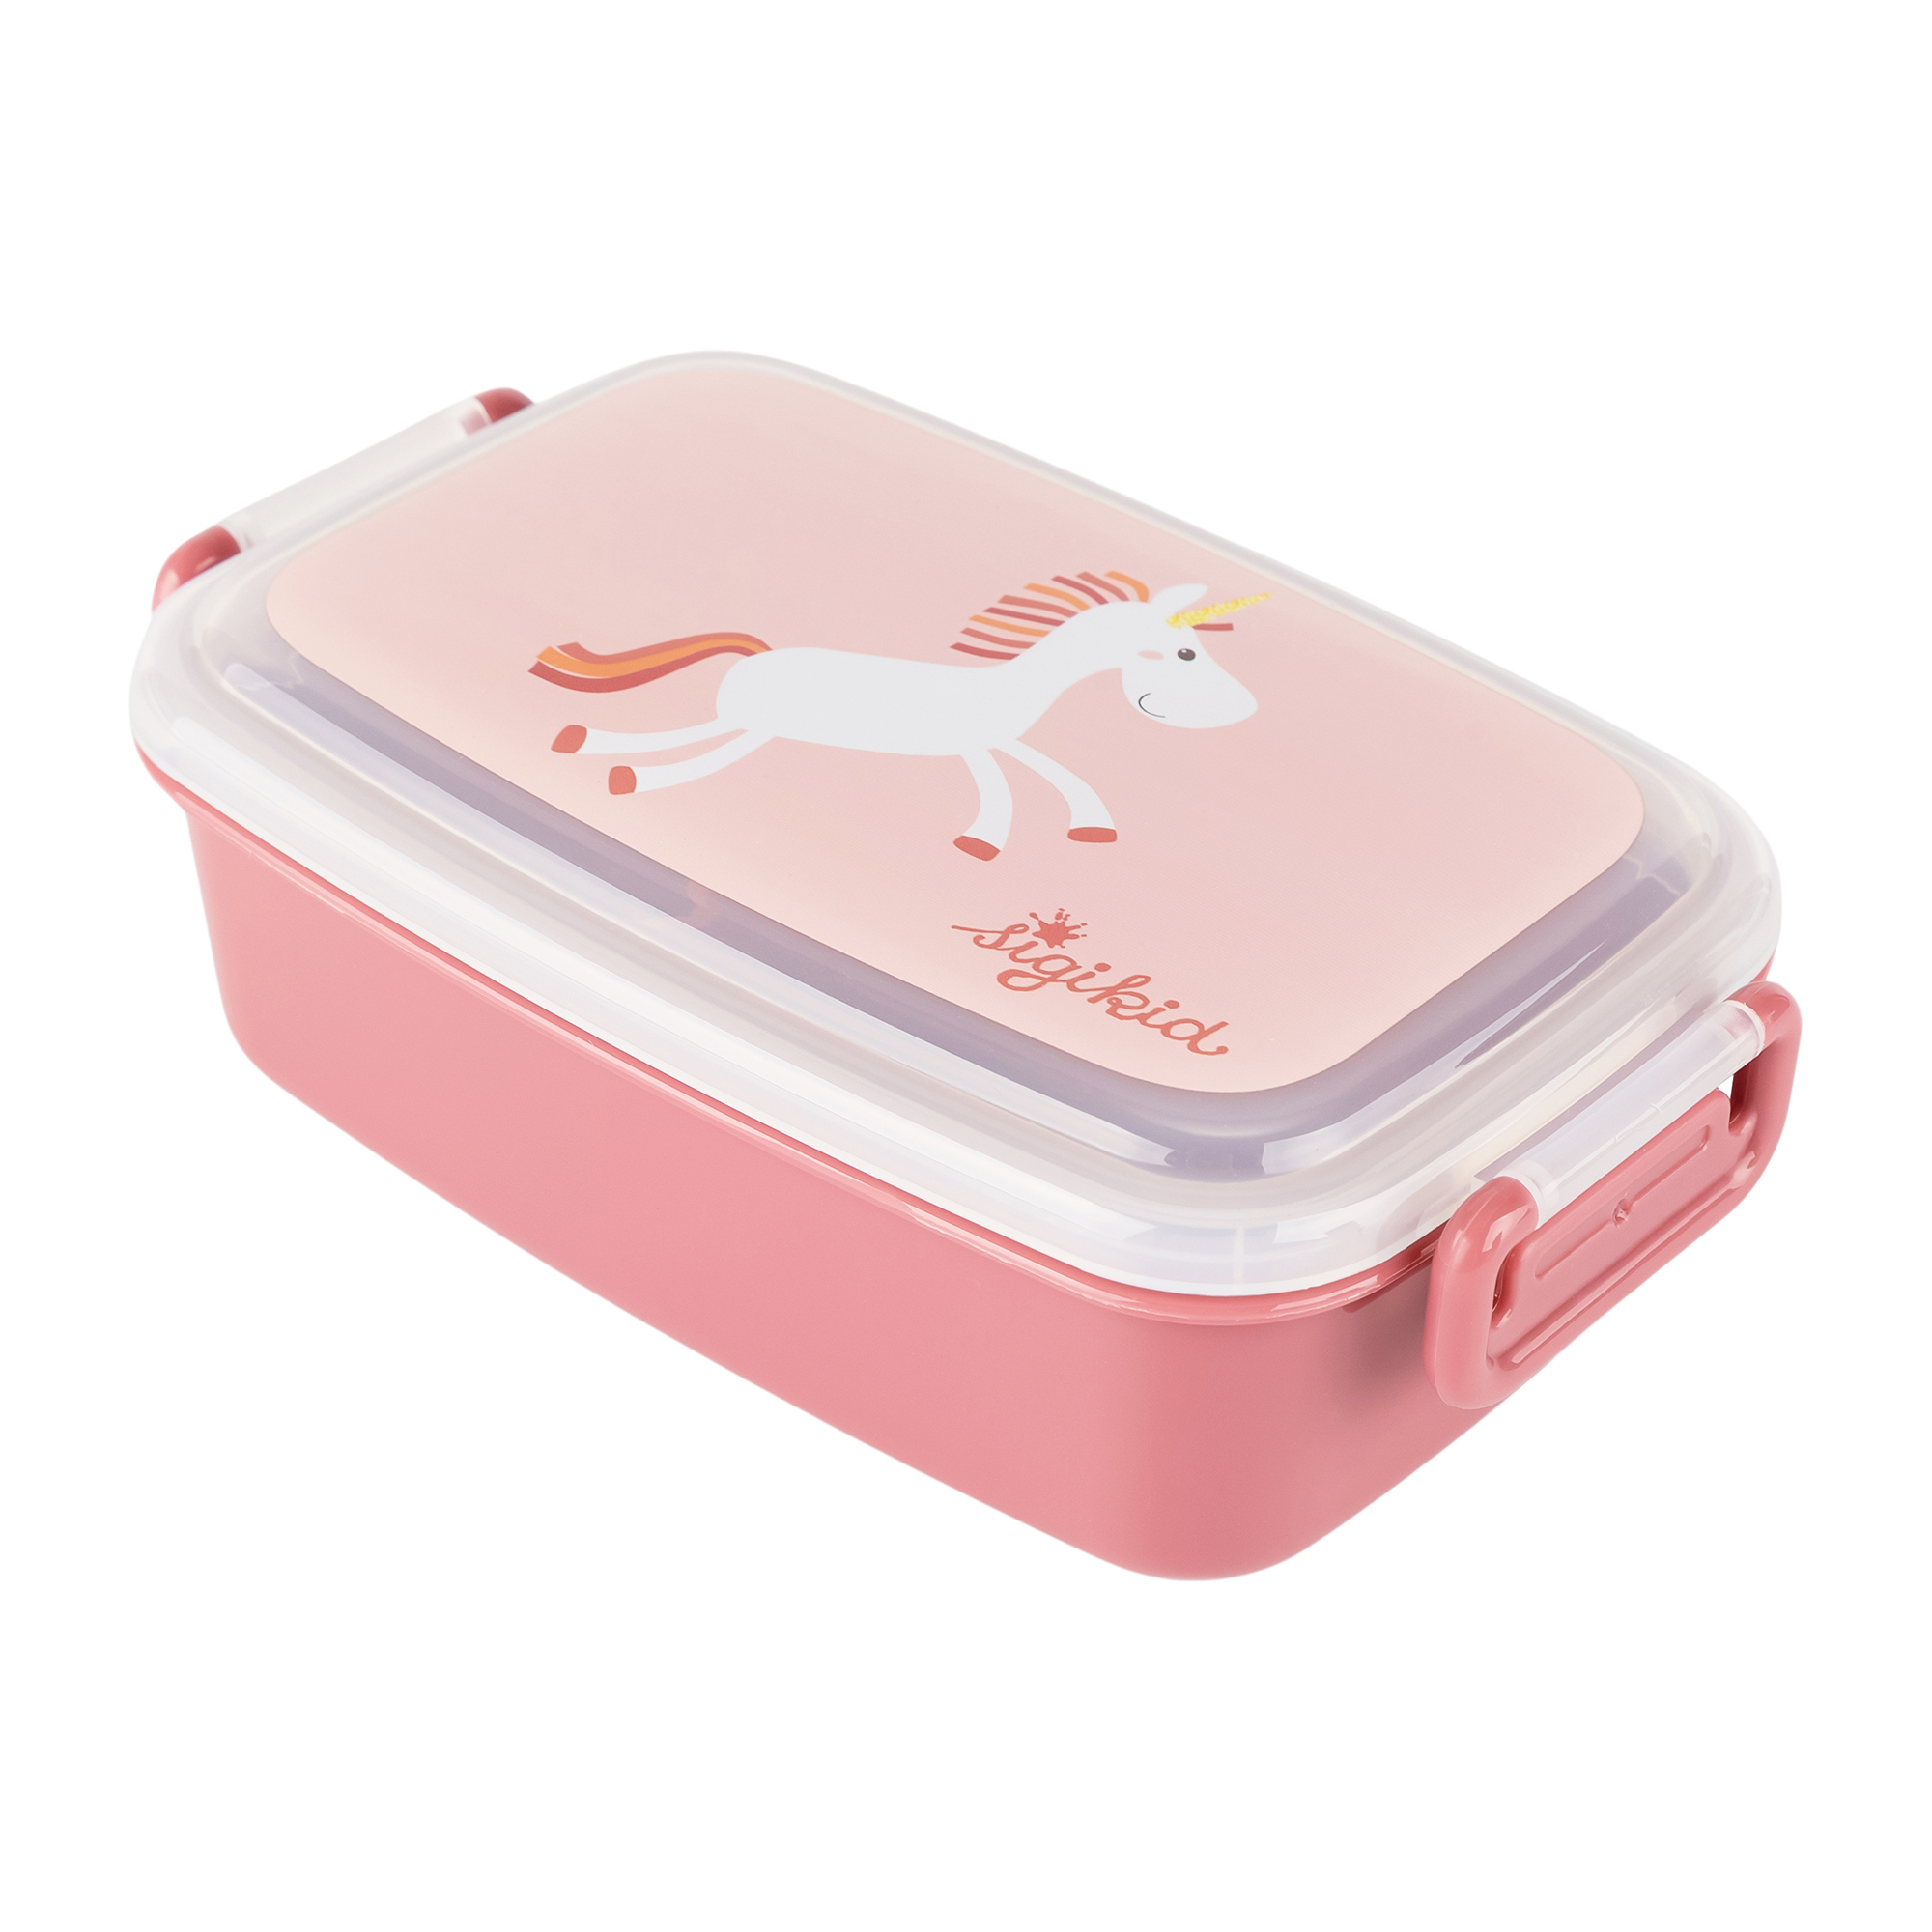 Lunchbox unicorn, removable partition inside